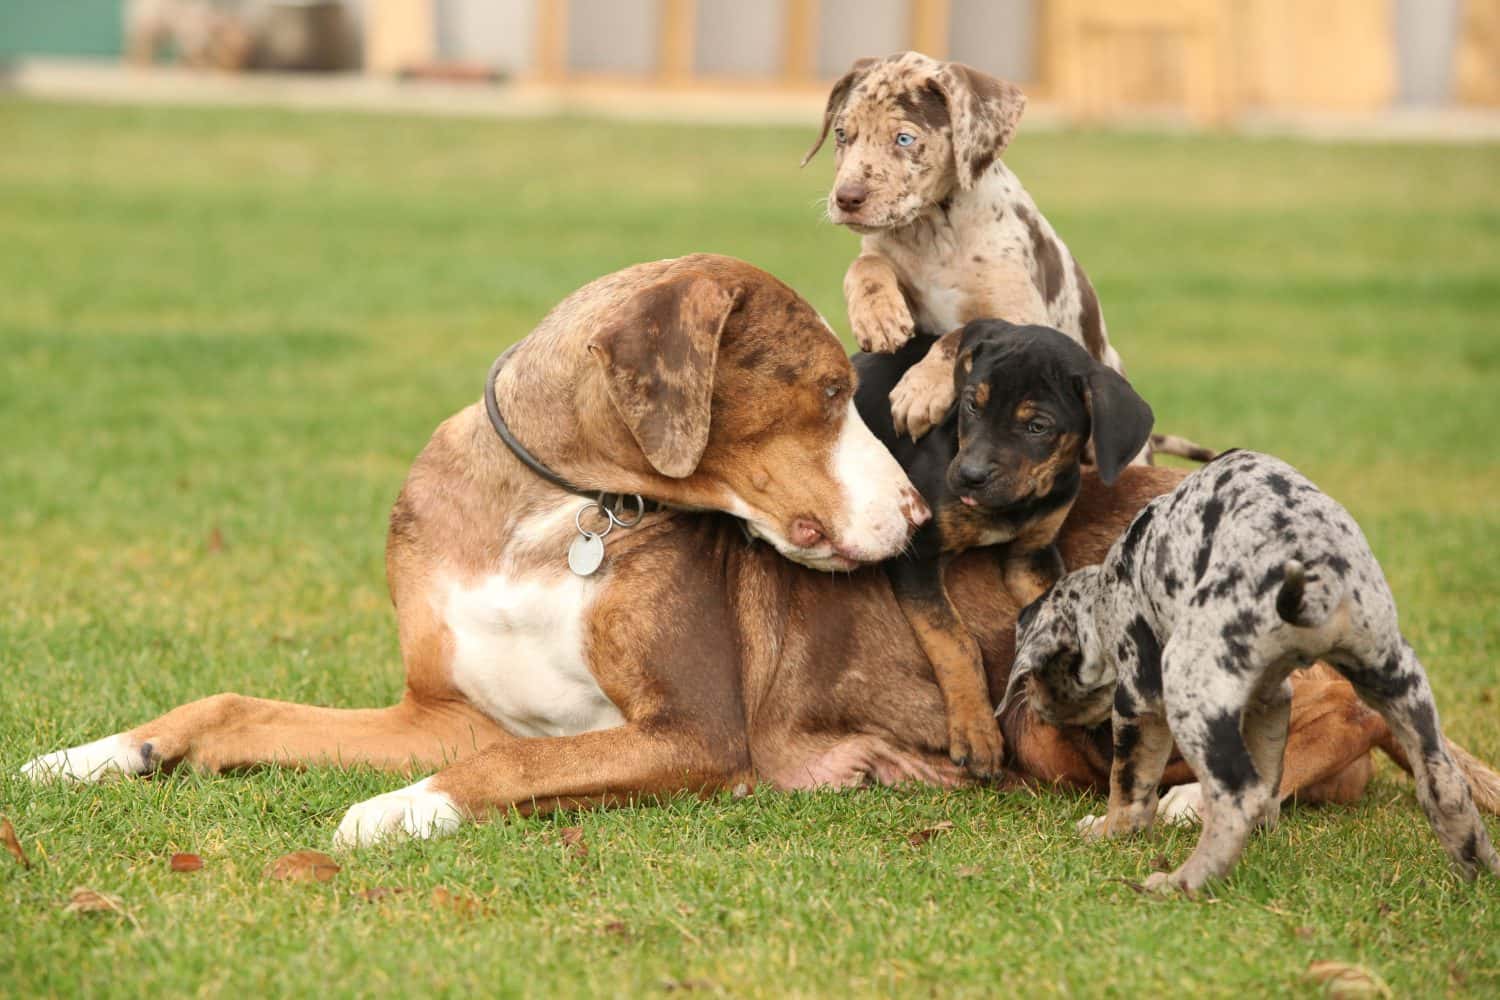 Louisiana Catahoula bitch with puppies on the grass